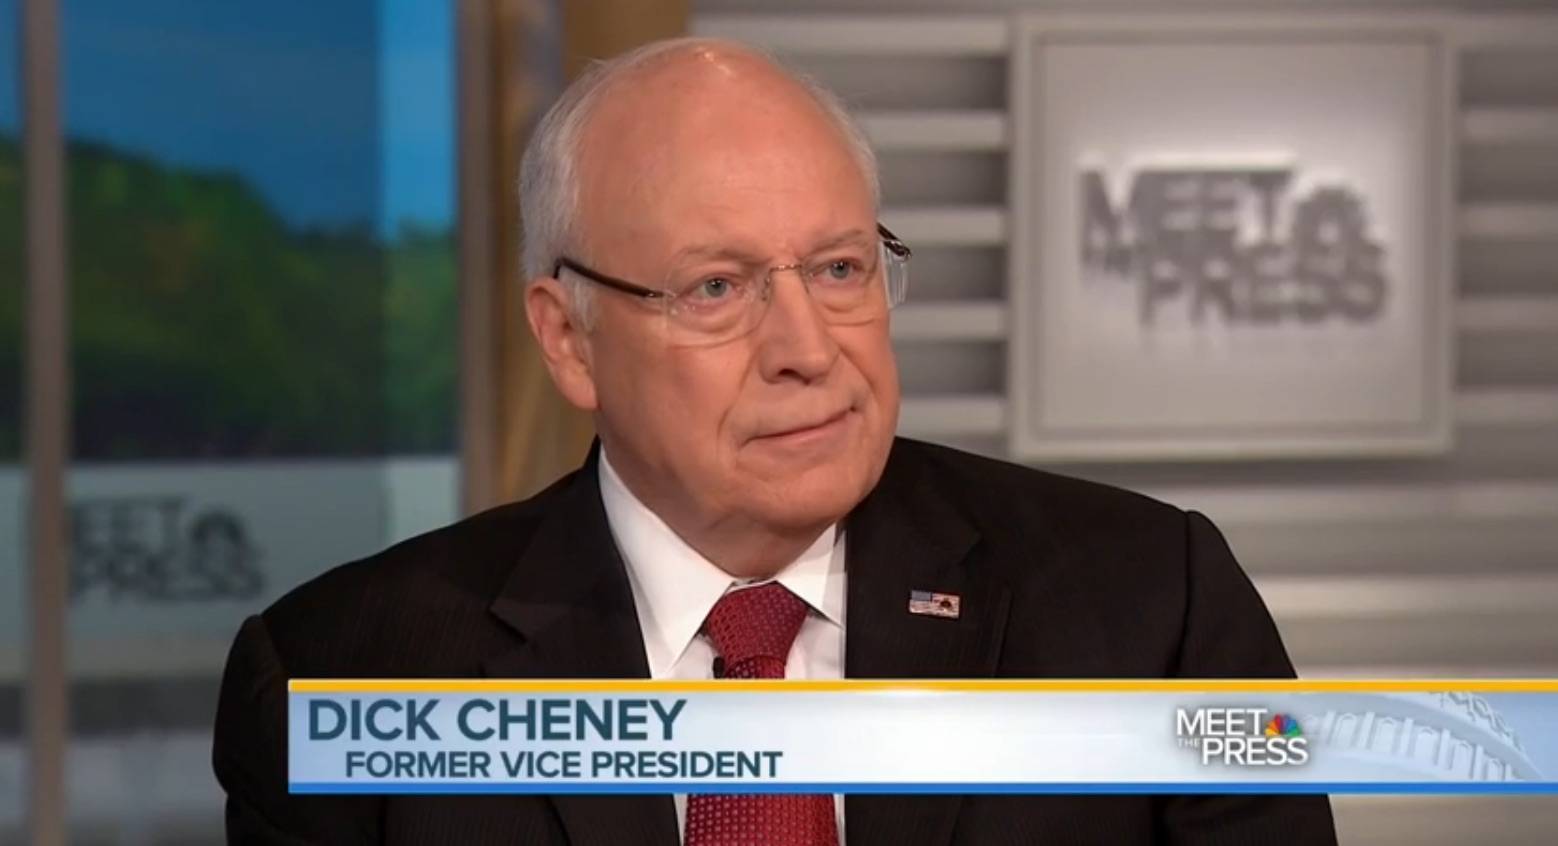 Former vice president dick cheney